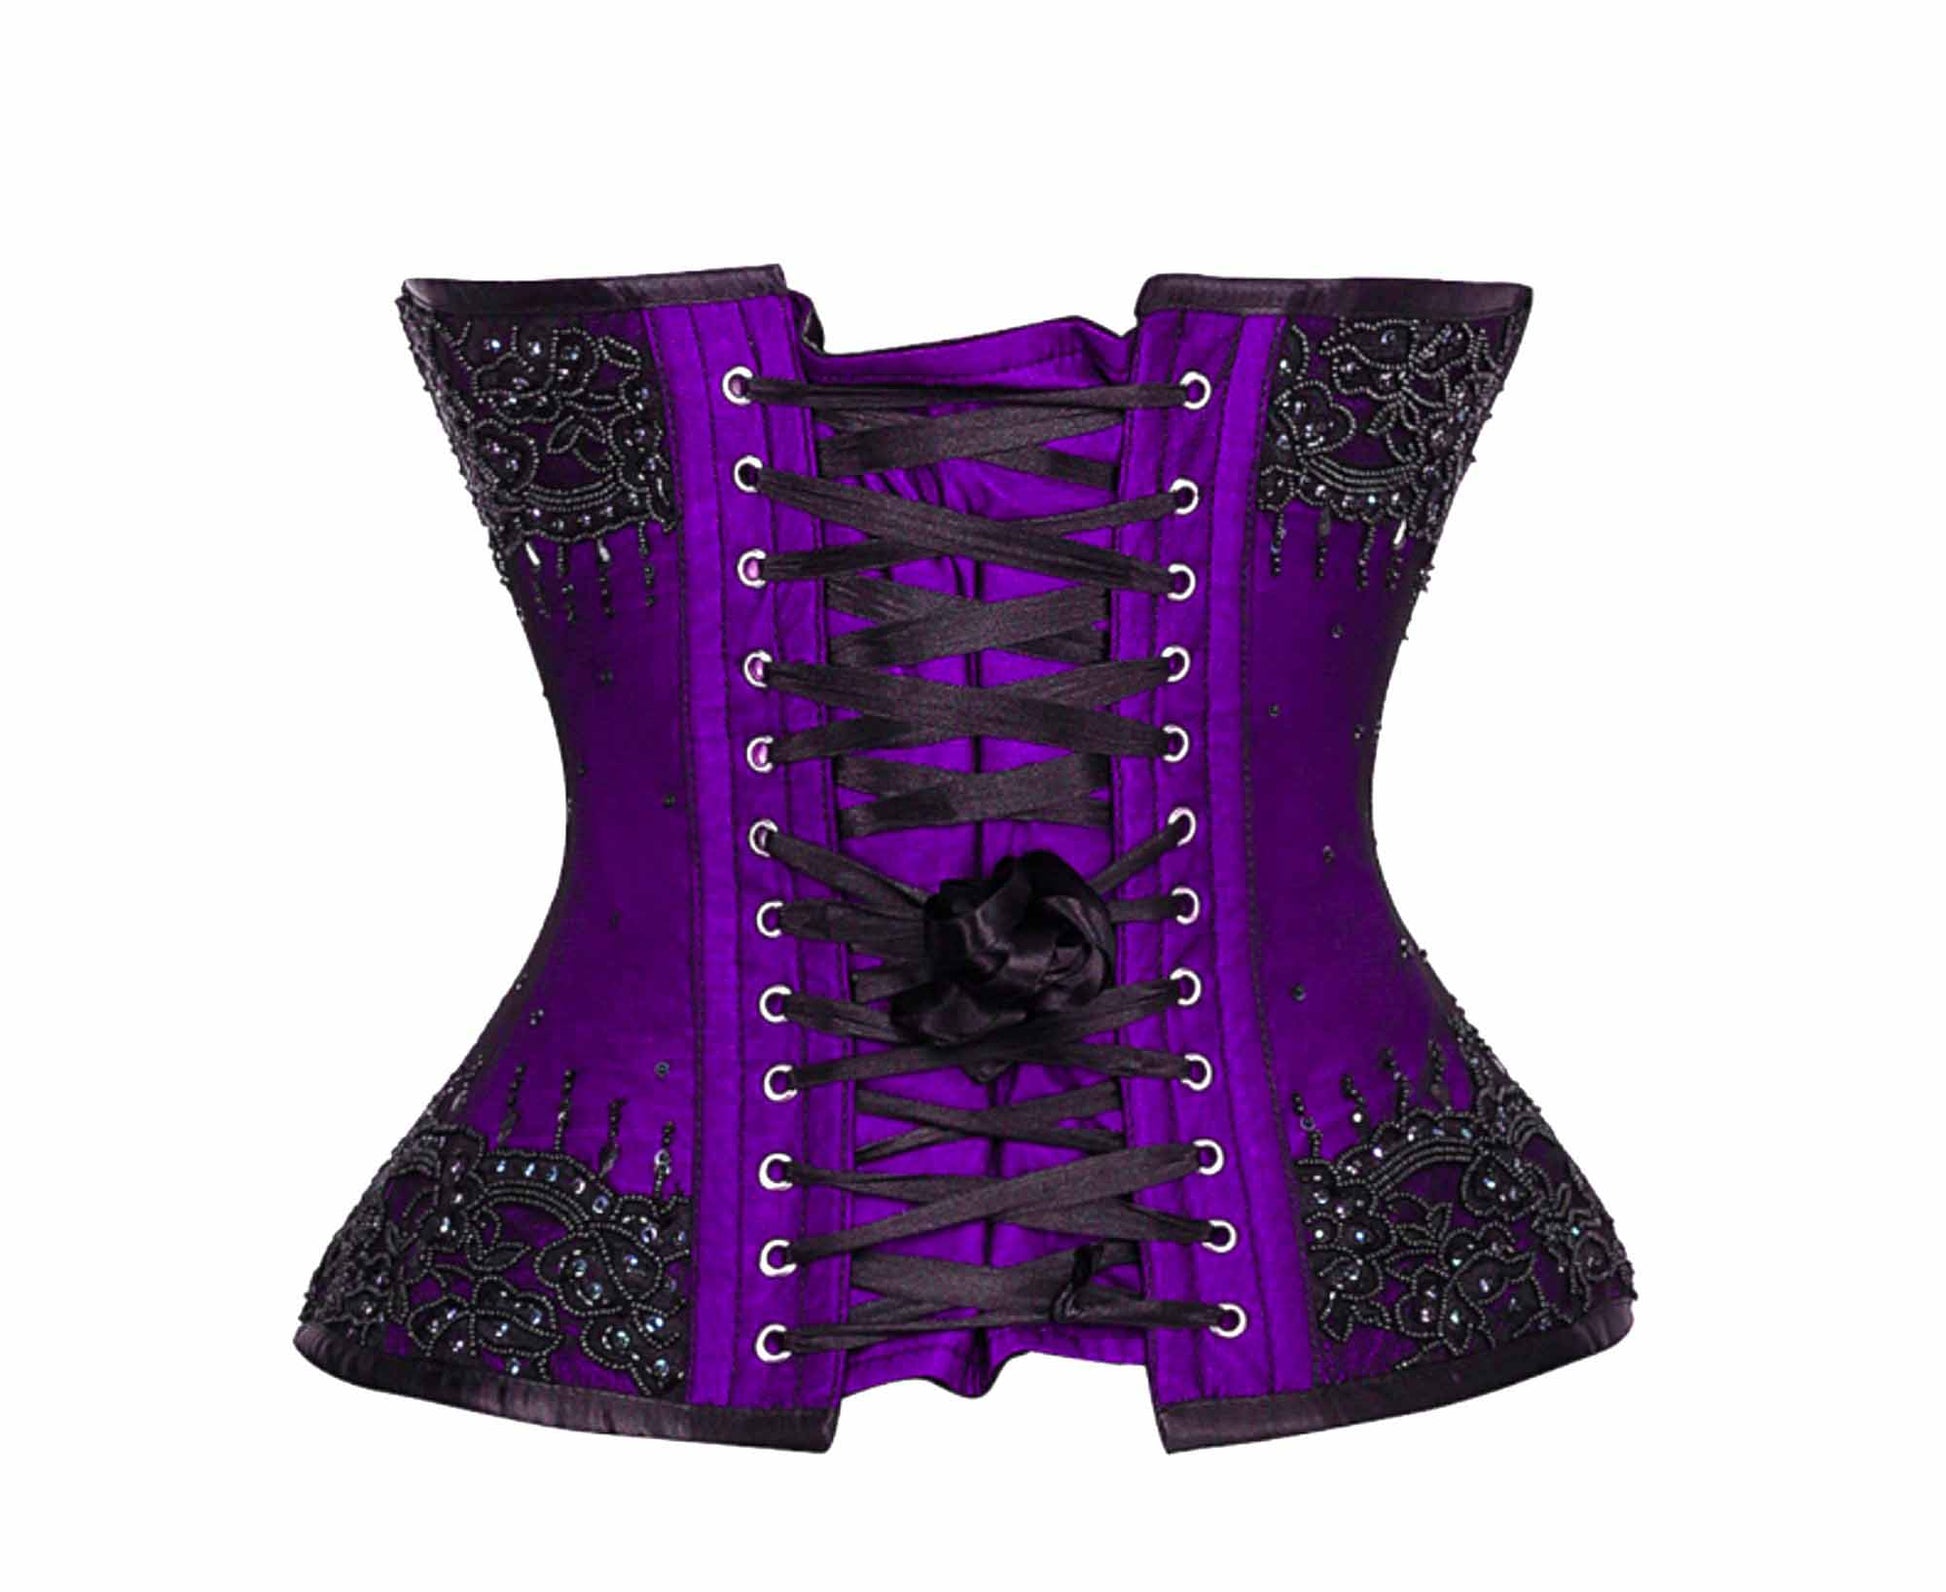 The back of the purple and black Beaded Lace Overlay Couture Corset.